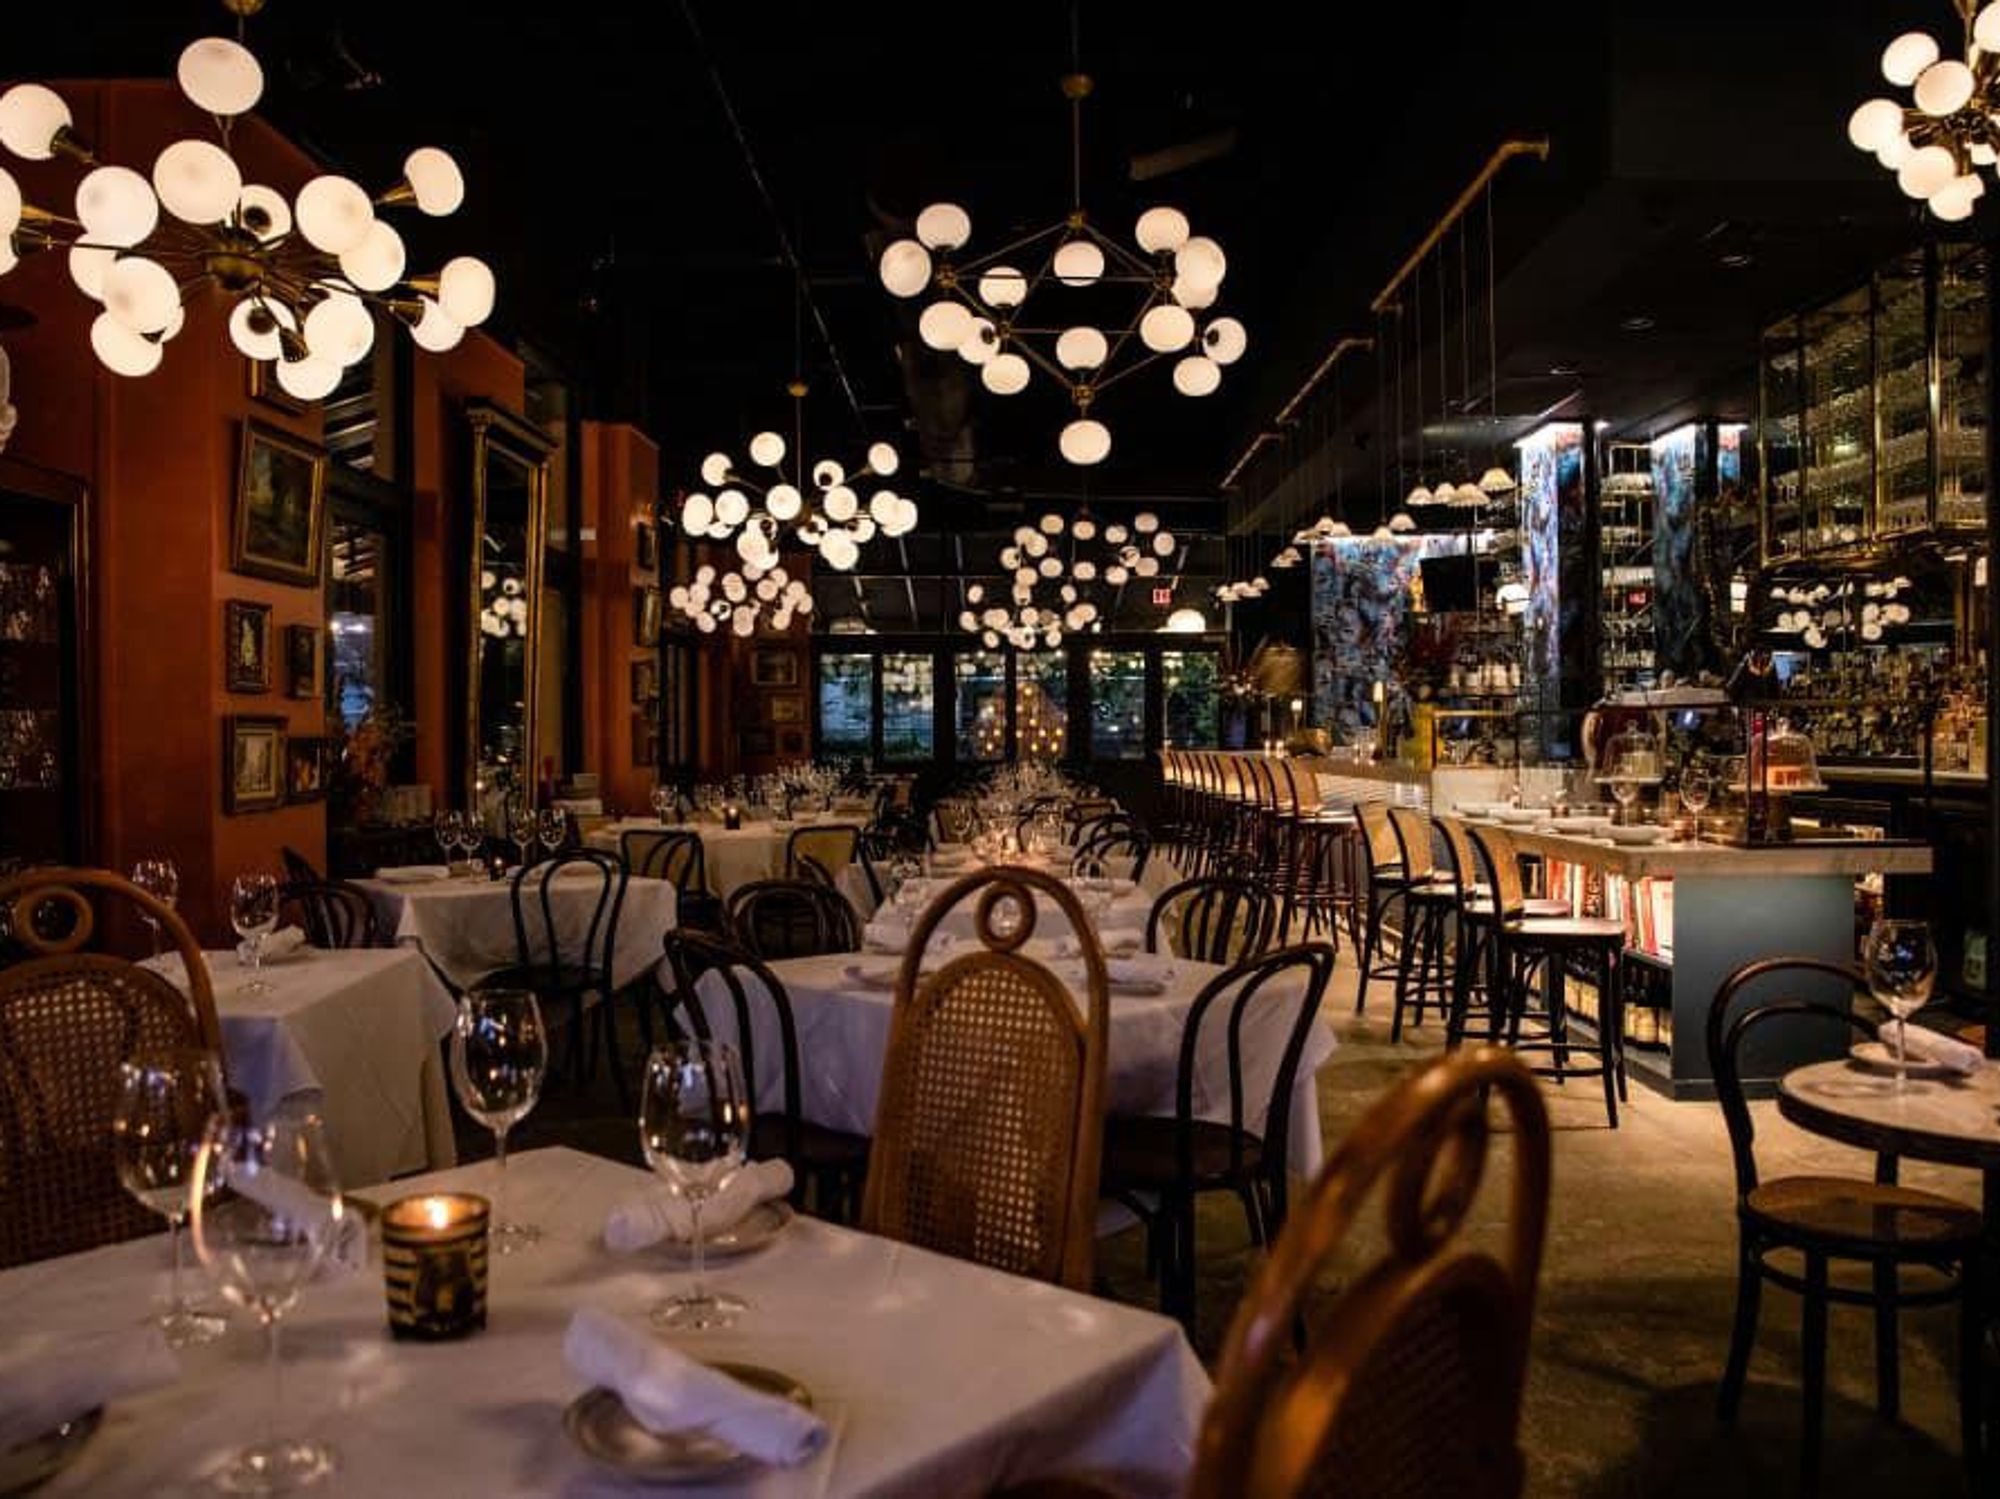 Gratify offers a dramatic setting for dining.